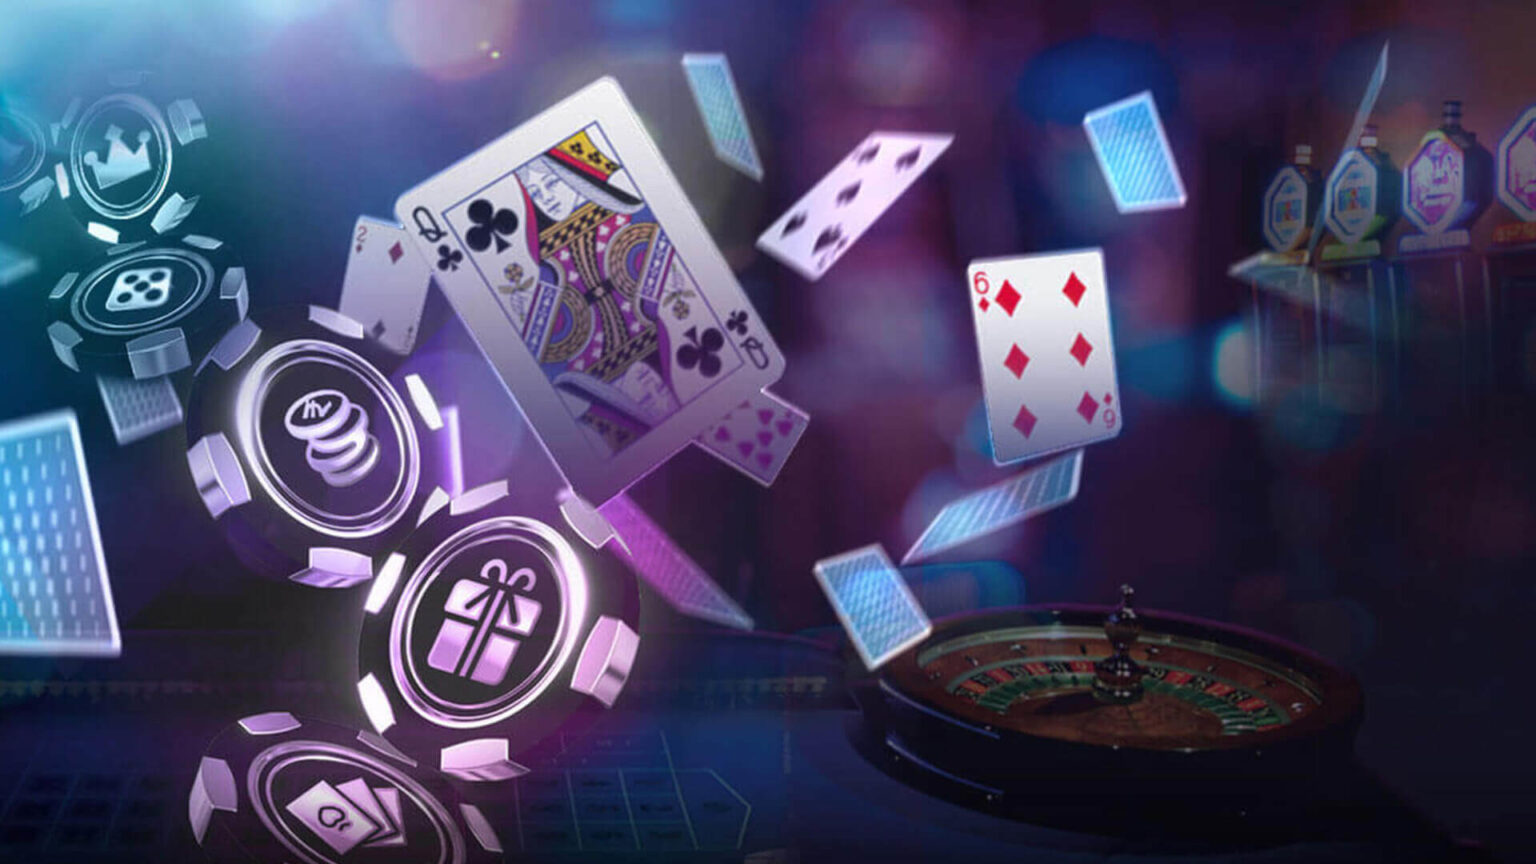 Are you stuck thinking about a plot for your next casino movie? Why not write a story about online casinos? See how this setting can work in your next film!